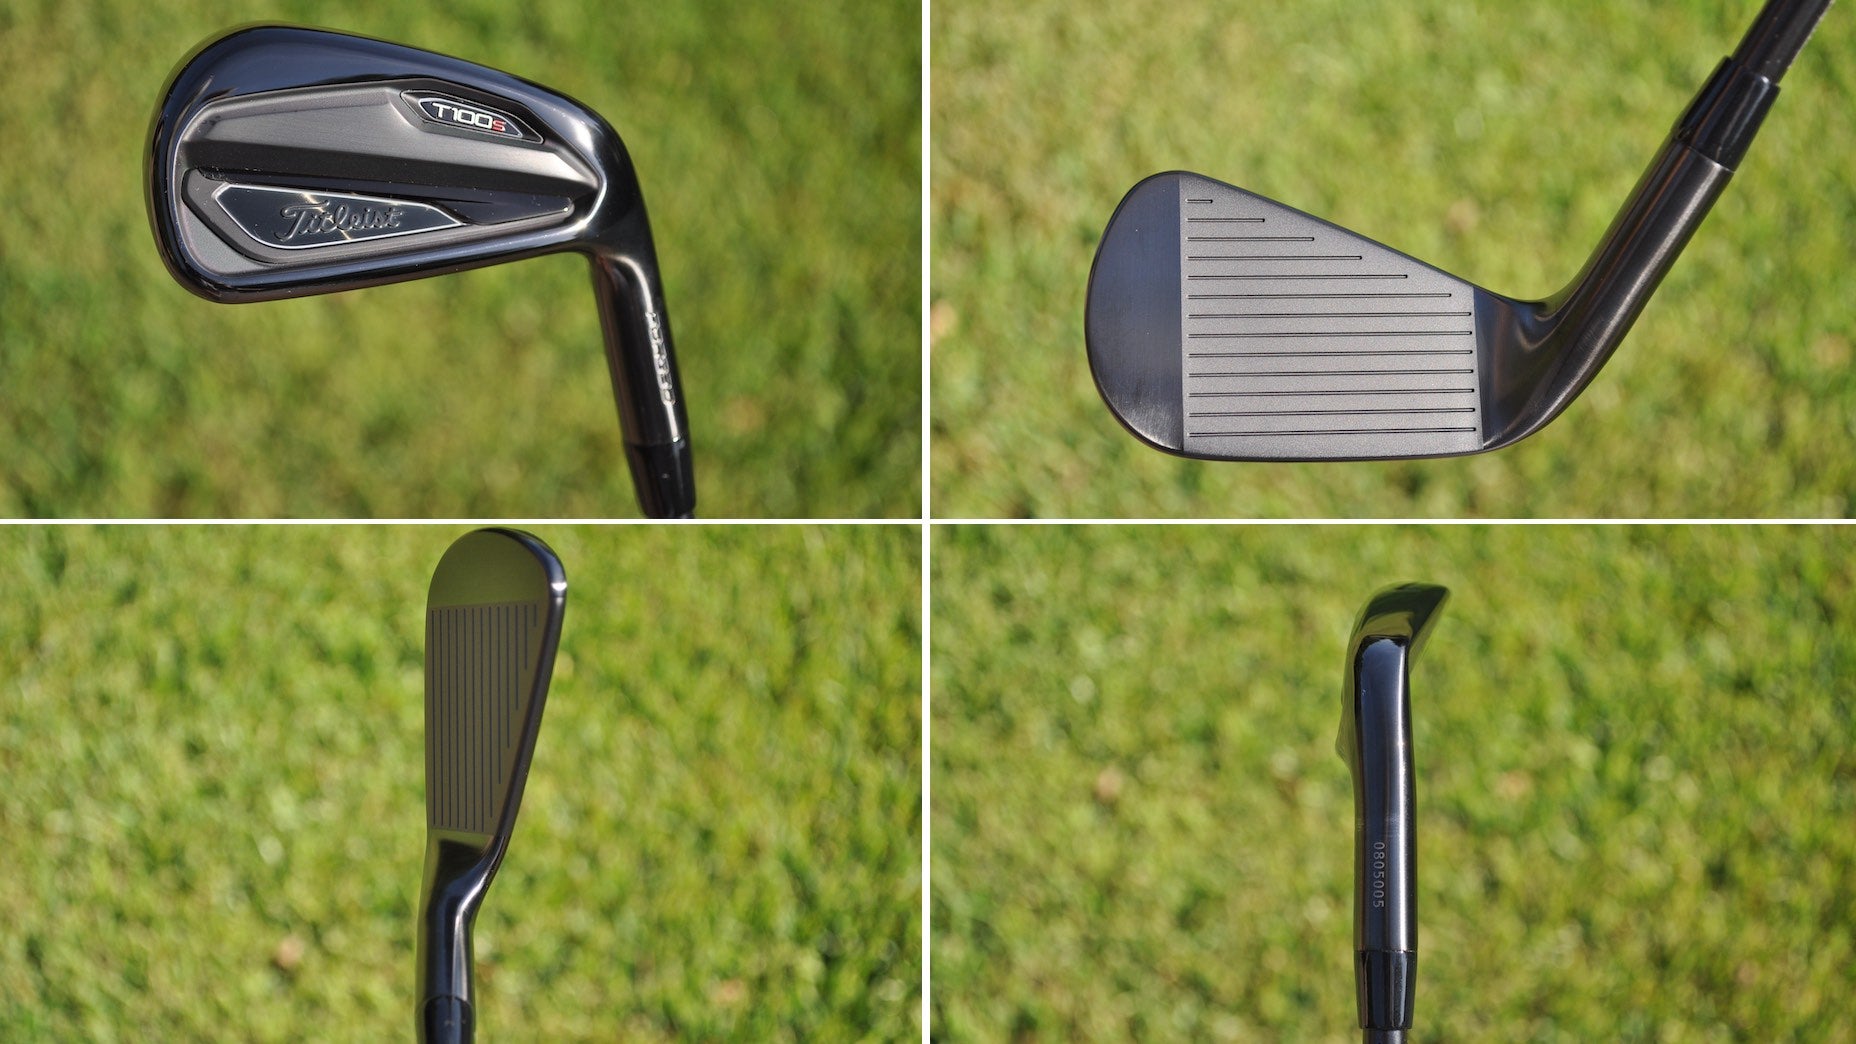 Titleist releases T100S, T200 irons in limited black finish First Look